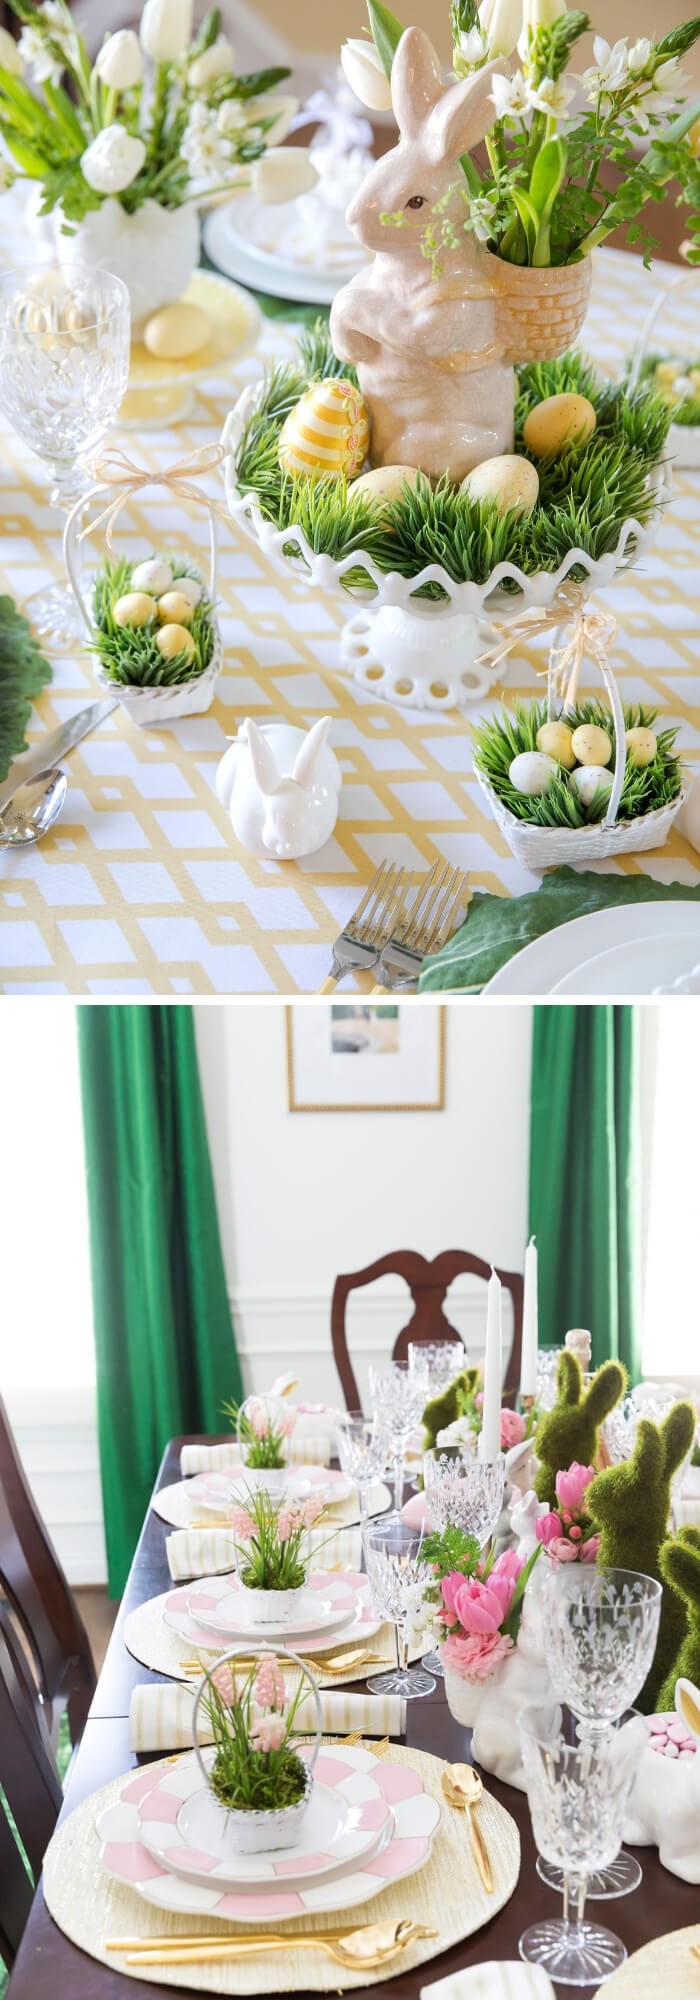 Spring Easter Theme Centerpieces: Floral And Traditional Easter Decorating Themes